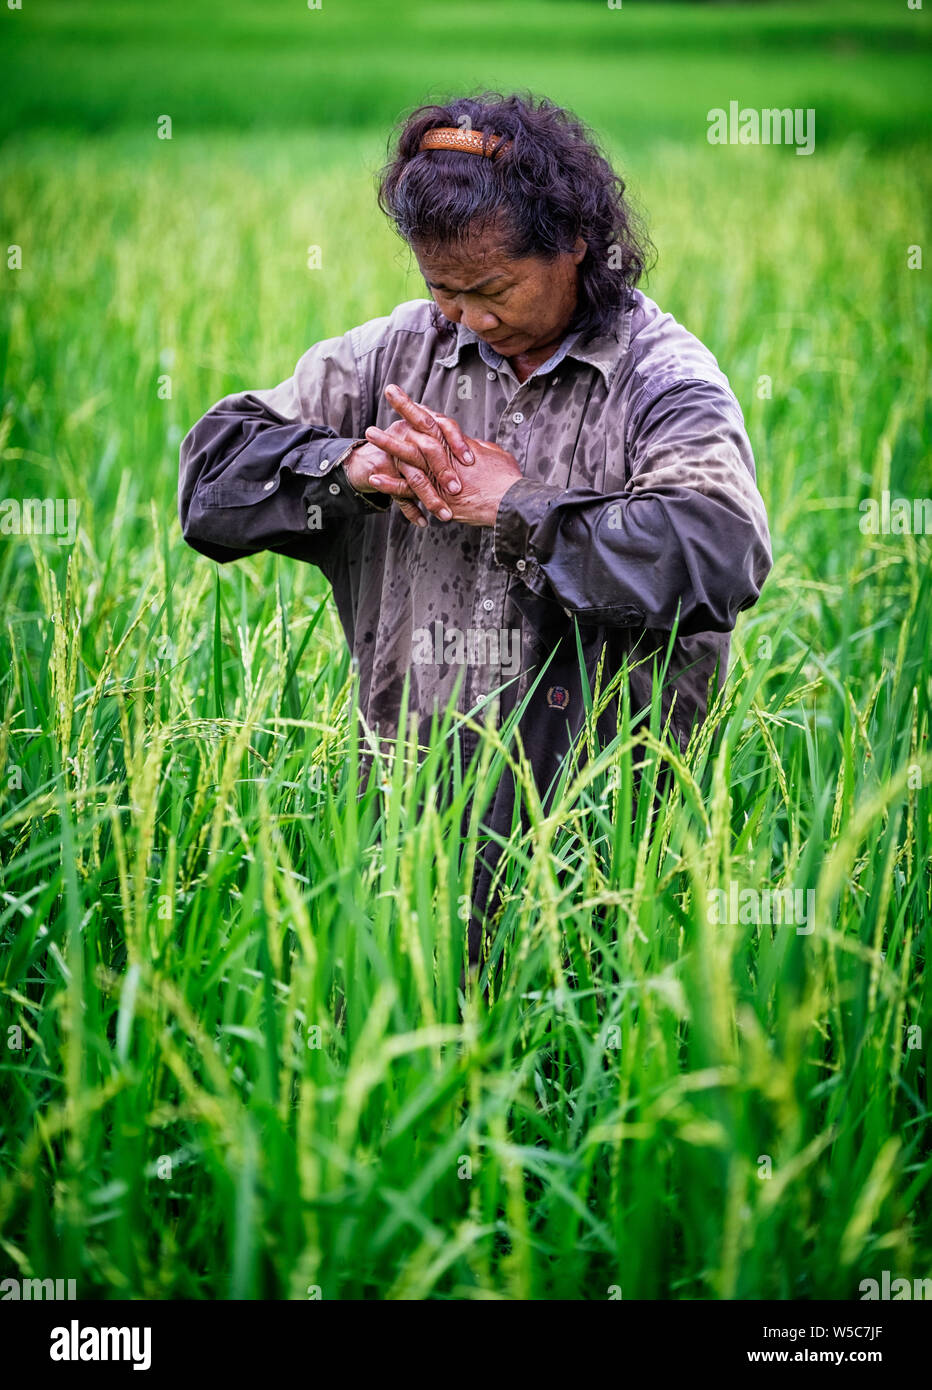 Yes, it hurts. a farmer works to relieve the pain in her hands and knuckles after a few hours of working in the rice fields in Nakhon Nayok, Thailand Stock Photo